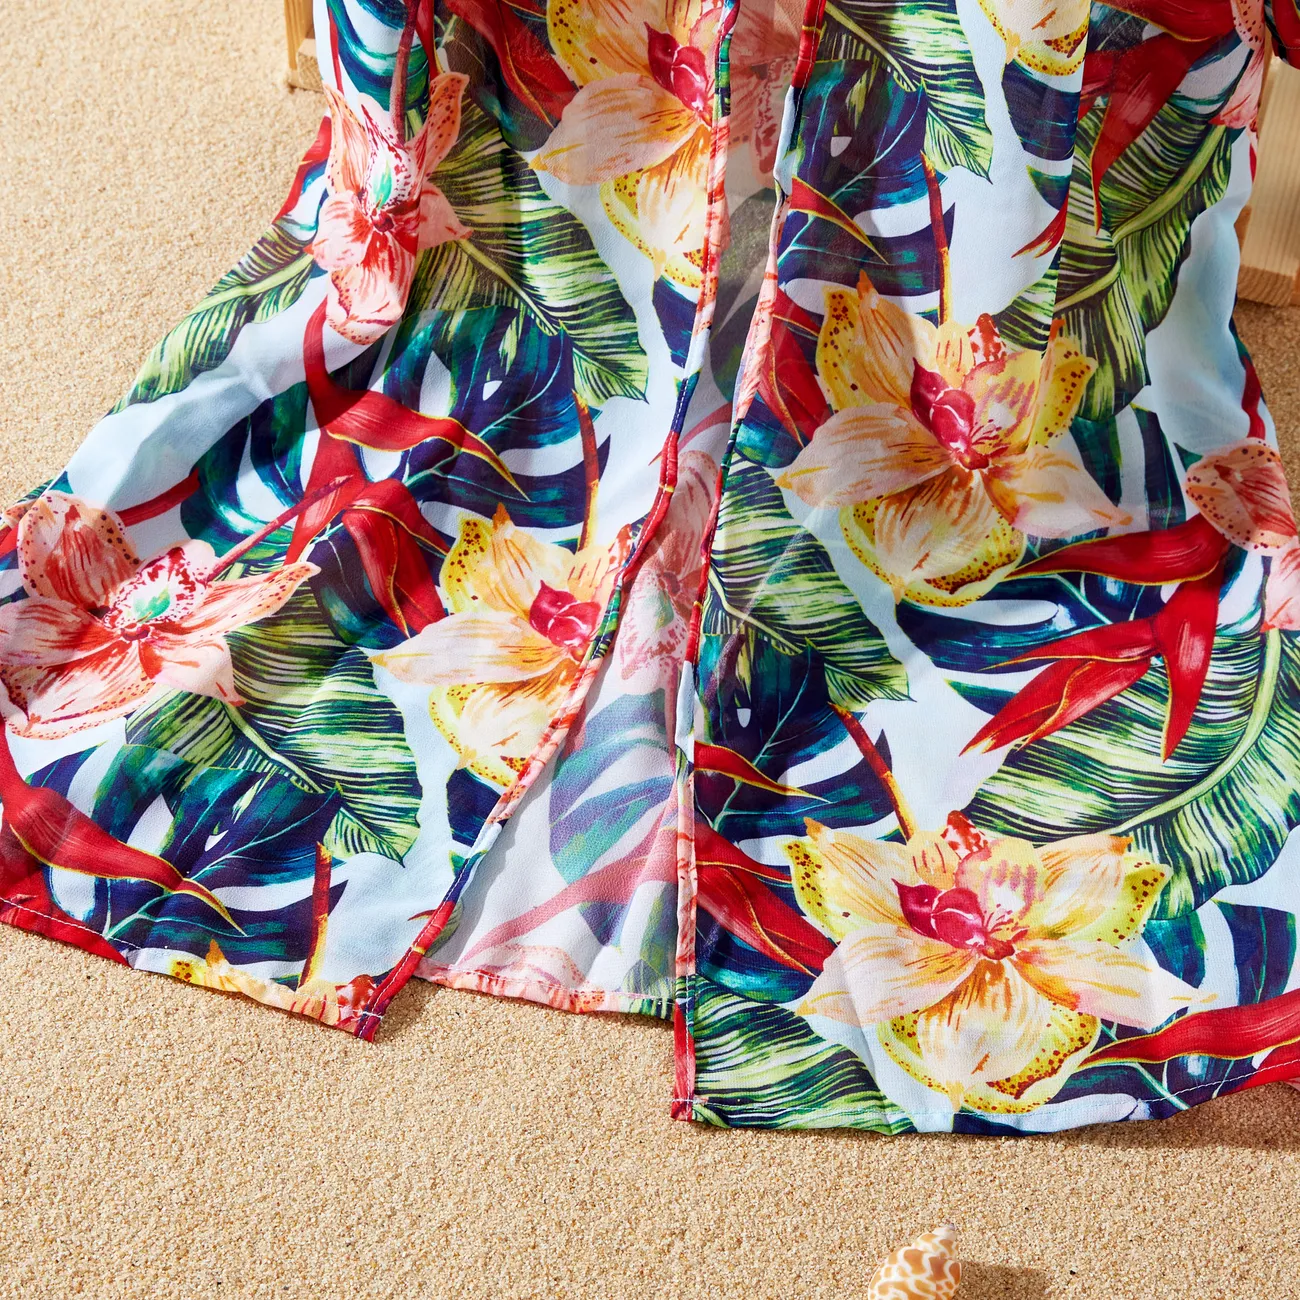 Family Matching Floral Drawstring Swim Trunks or Ruched Shell Edge Bikini with Optional Swim Cover Up Red big image 1